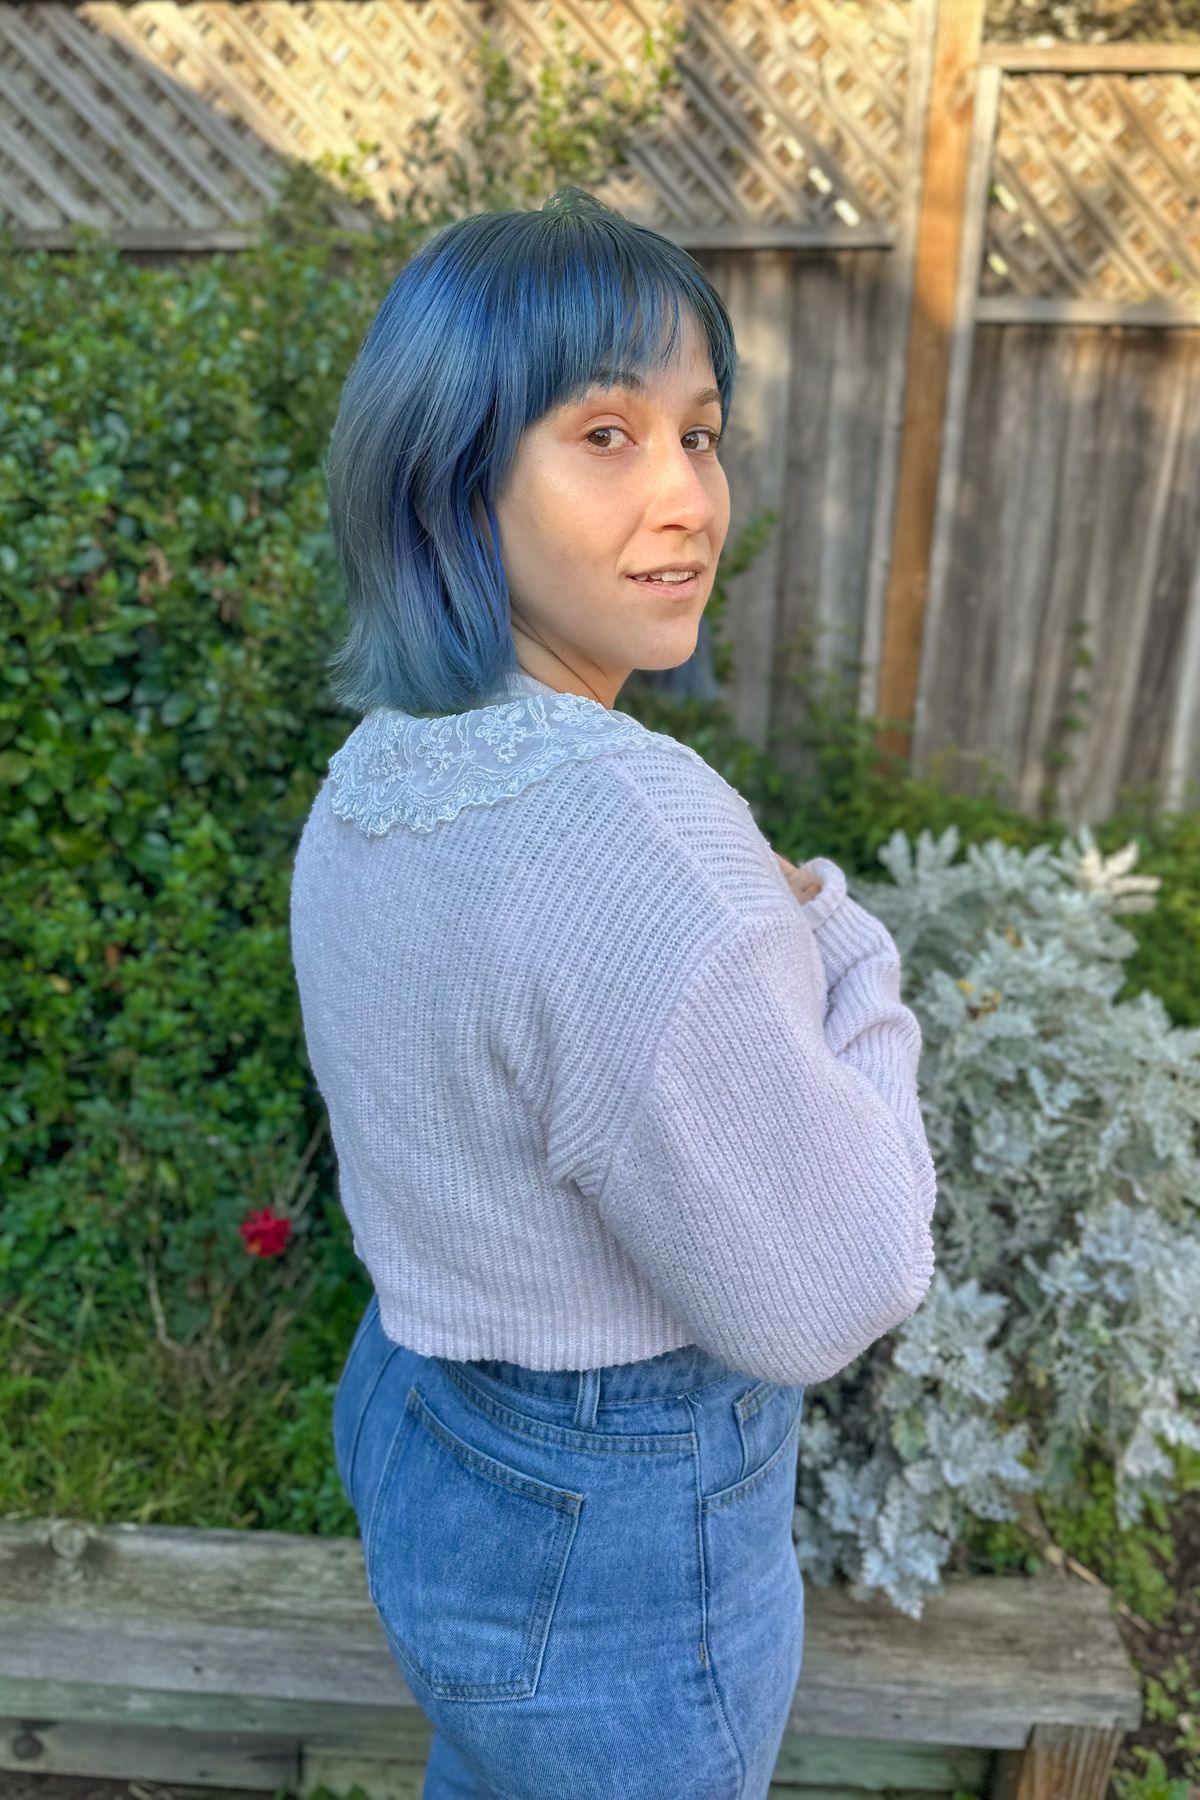 A blue-haired woman wearing a pink frilly cardigan and jeans looks back over her shoulder standing in front of a patch of grass in front of a backyard fence.